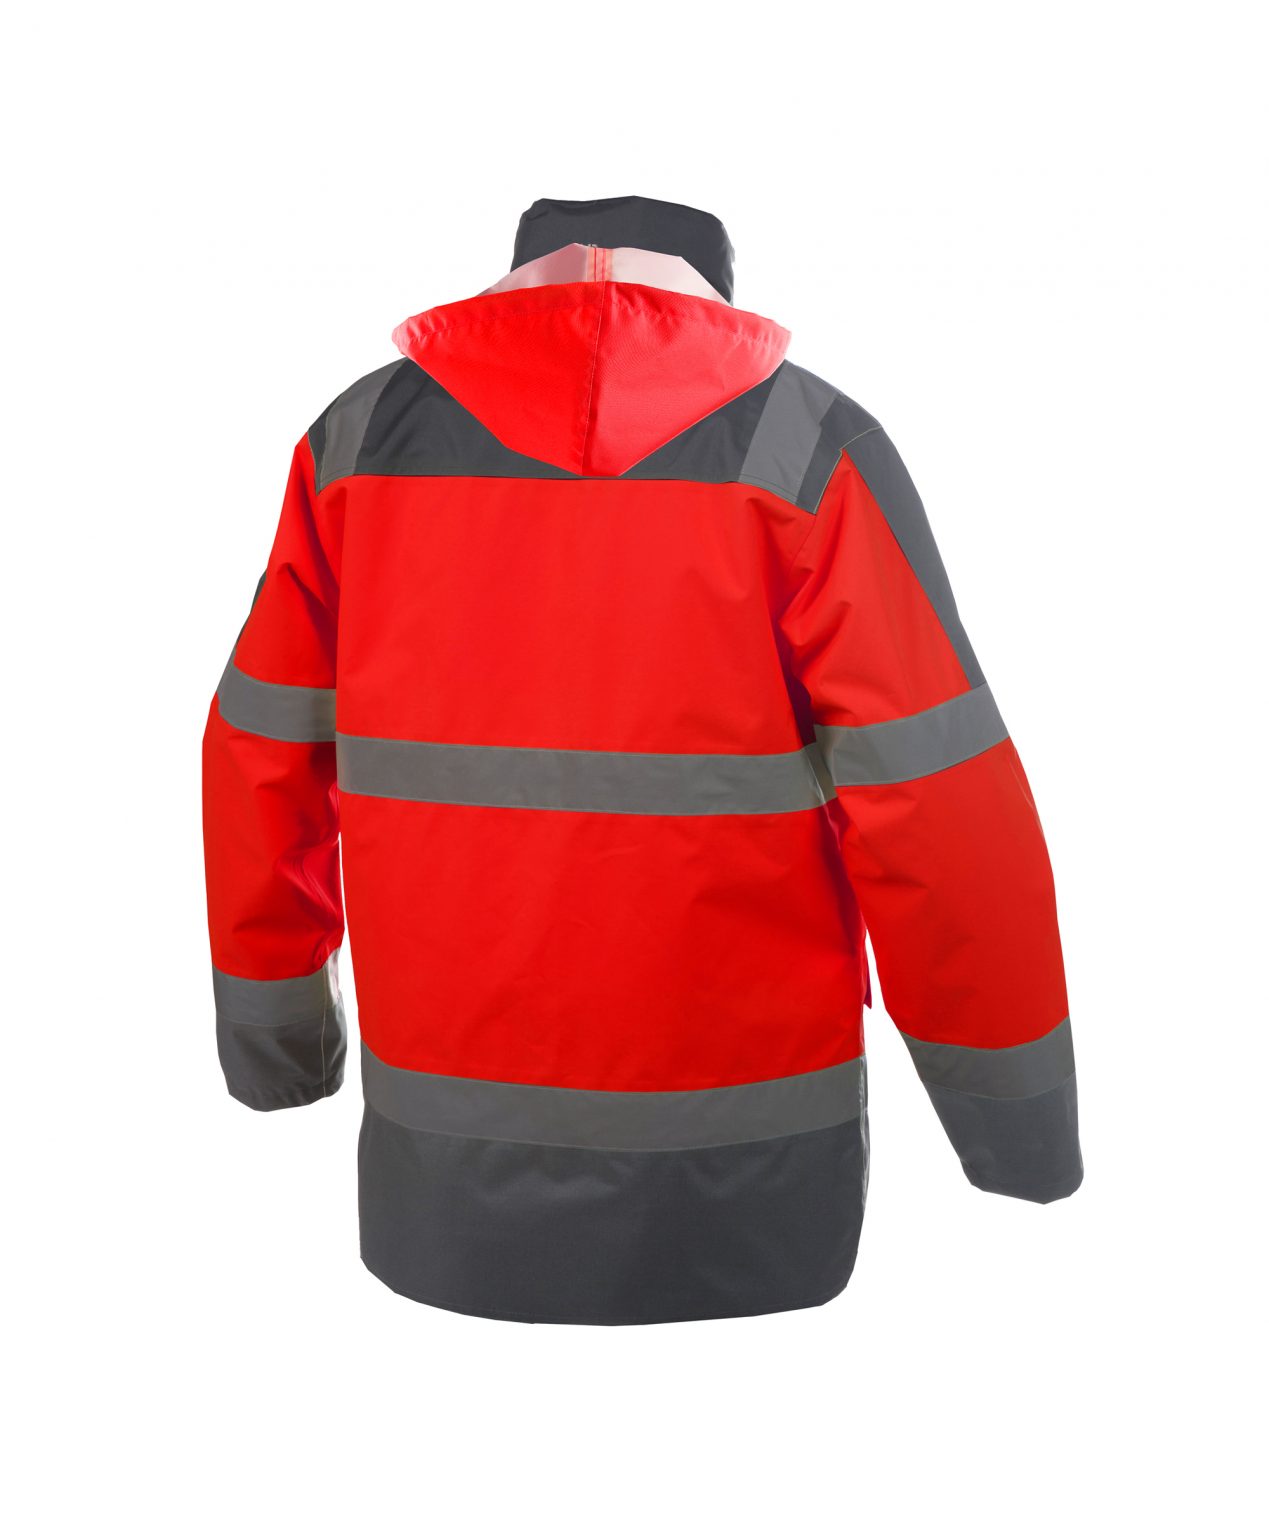 atlantis high visibility waterproof parka fluo red cement grey back